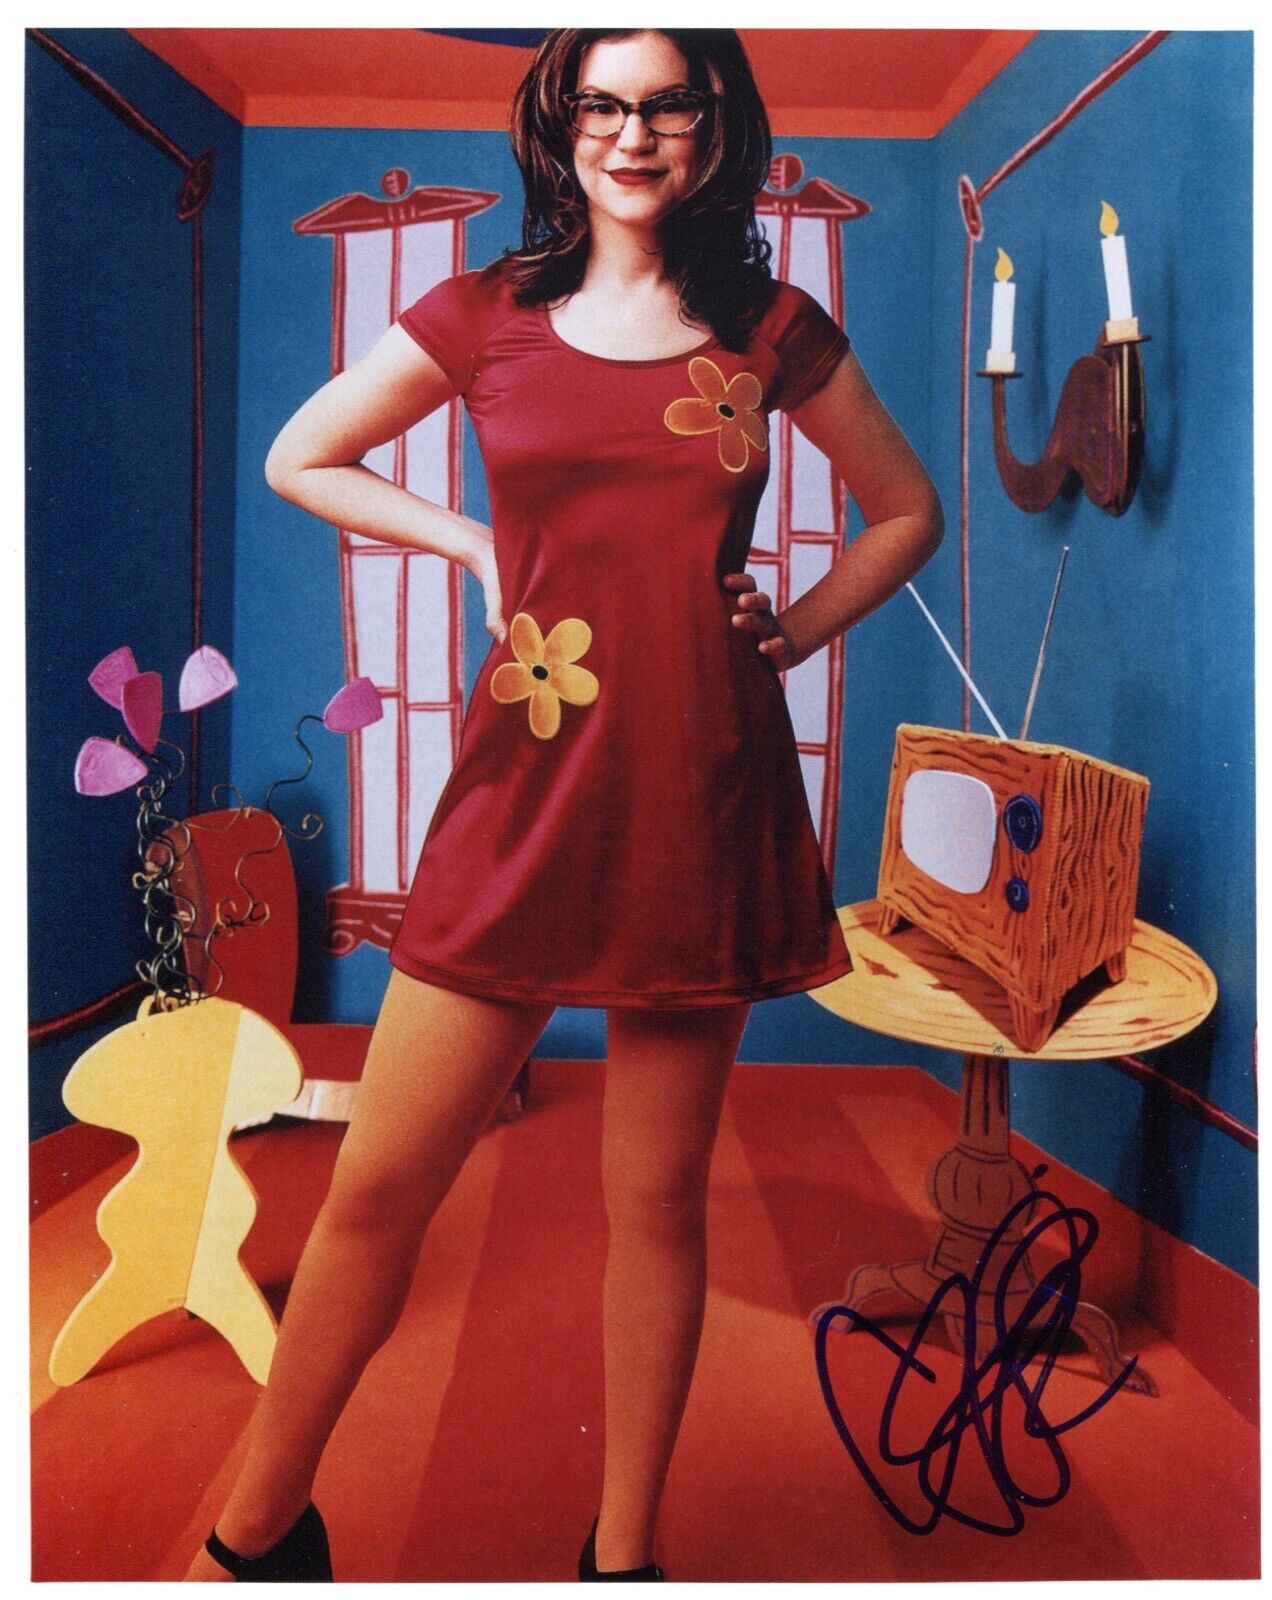 REALITY BITES theme song pop star Lisa Loeb signed 8x10 Photo Poster painting